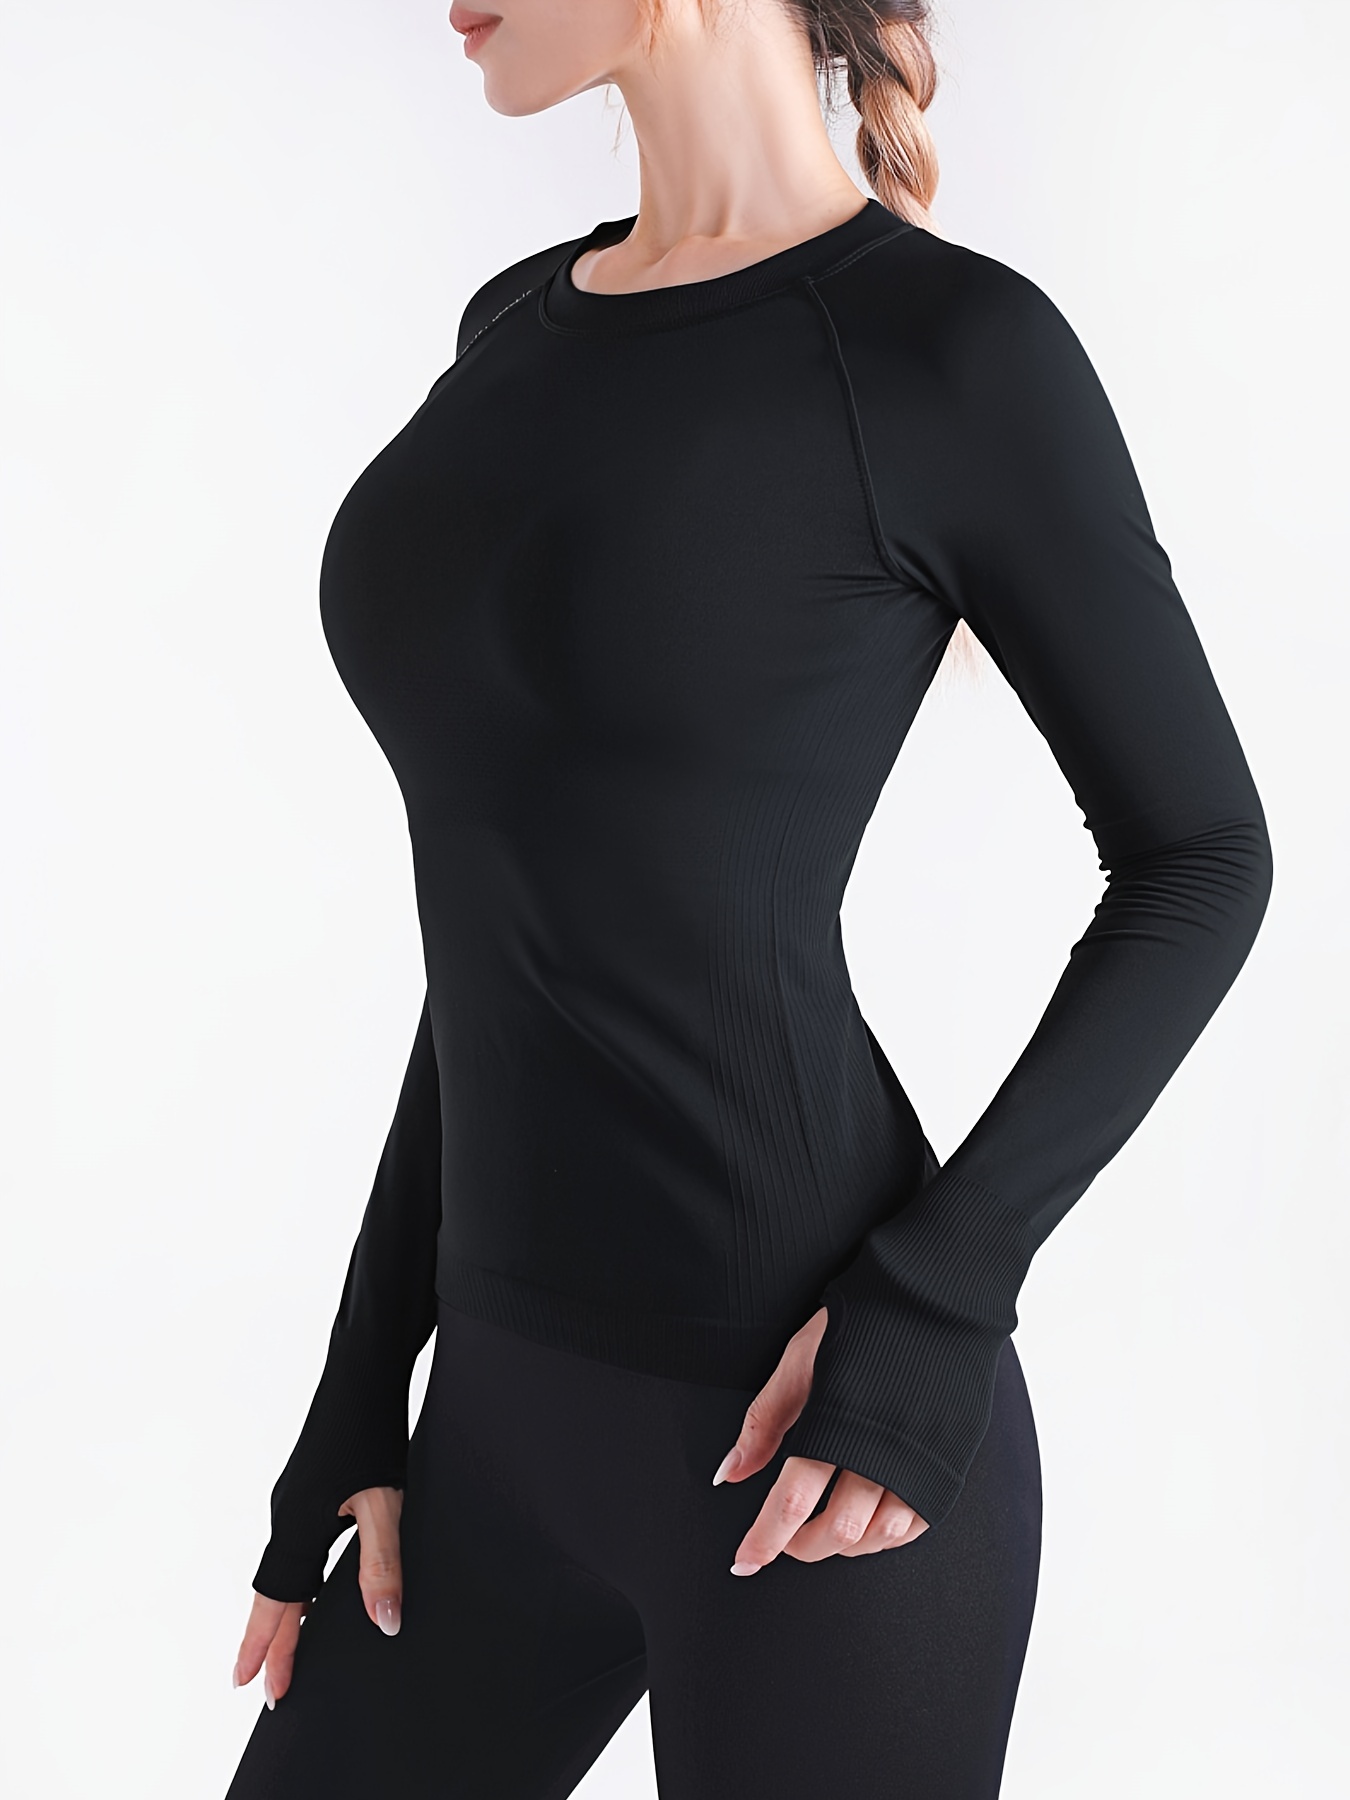 Simple Yoga Clothes Women's Tight Gym Clothes Sports Long Sleeves